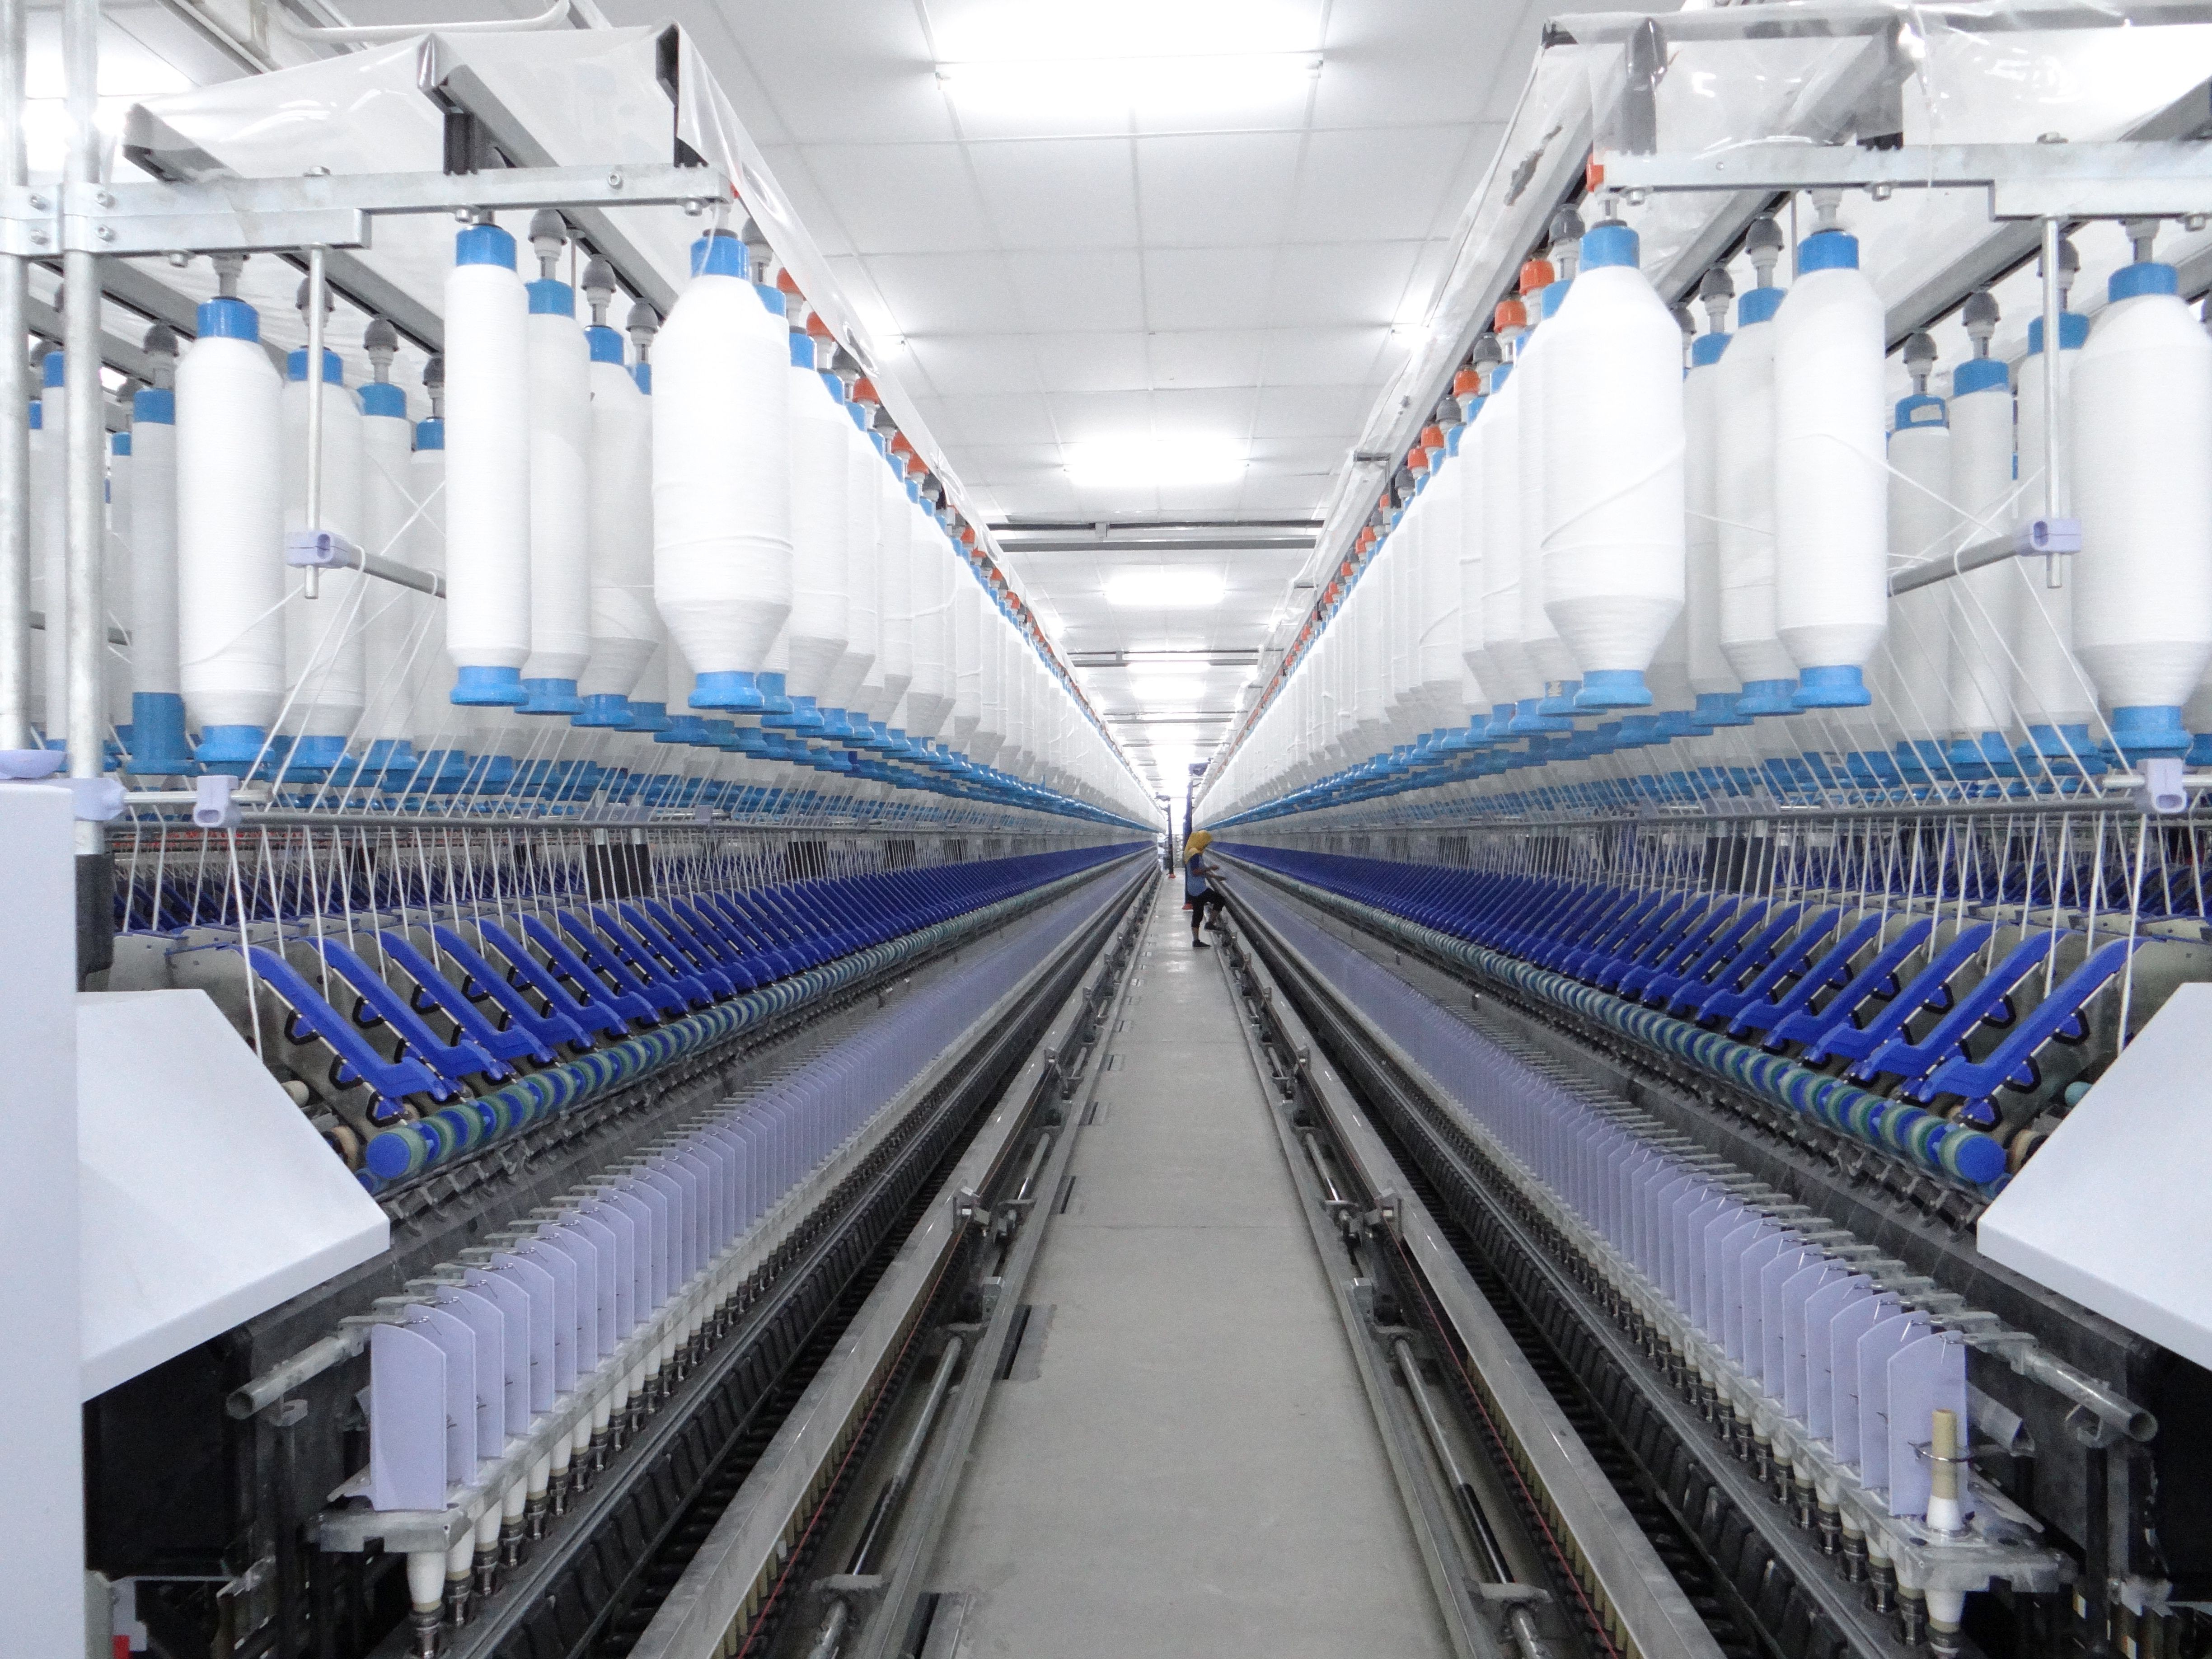 Lotus Indah Textile Industries produces synthetic spun yarns for industrial applications.